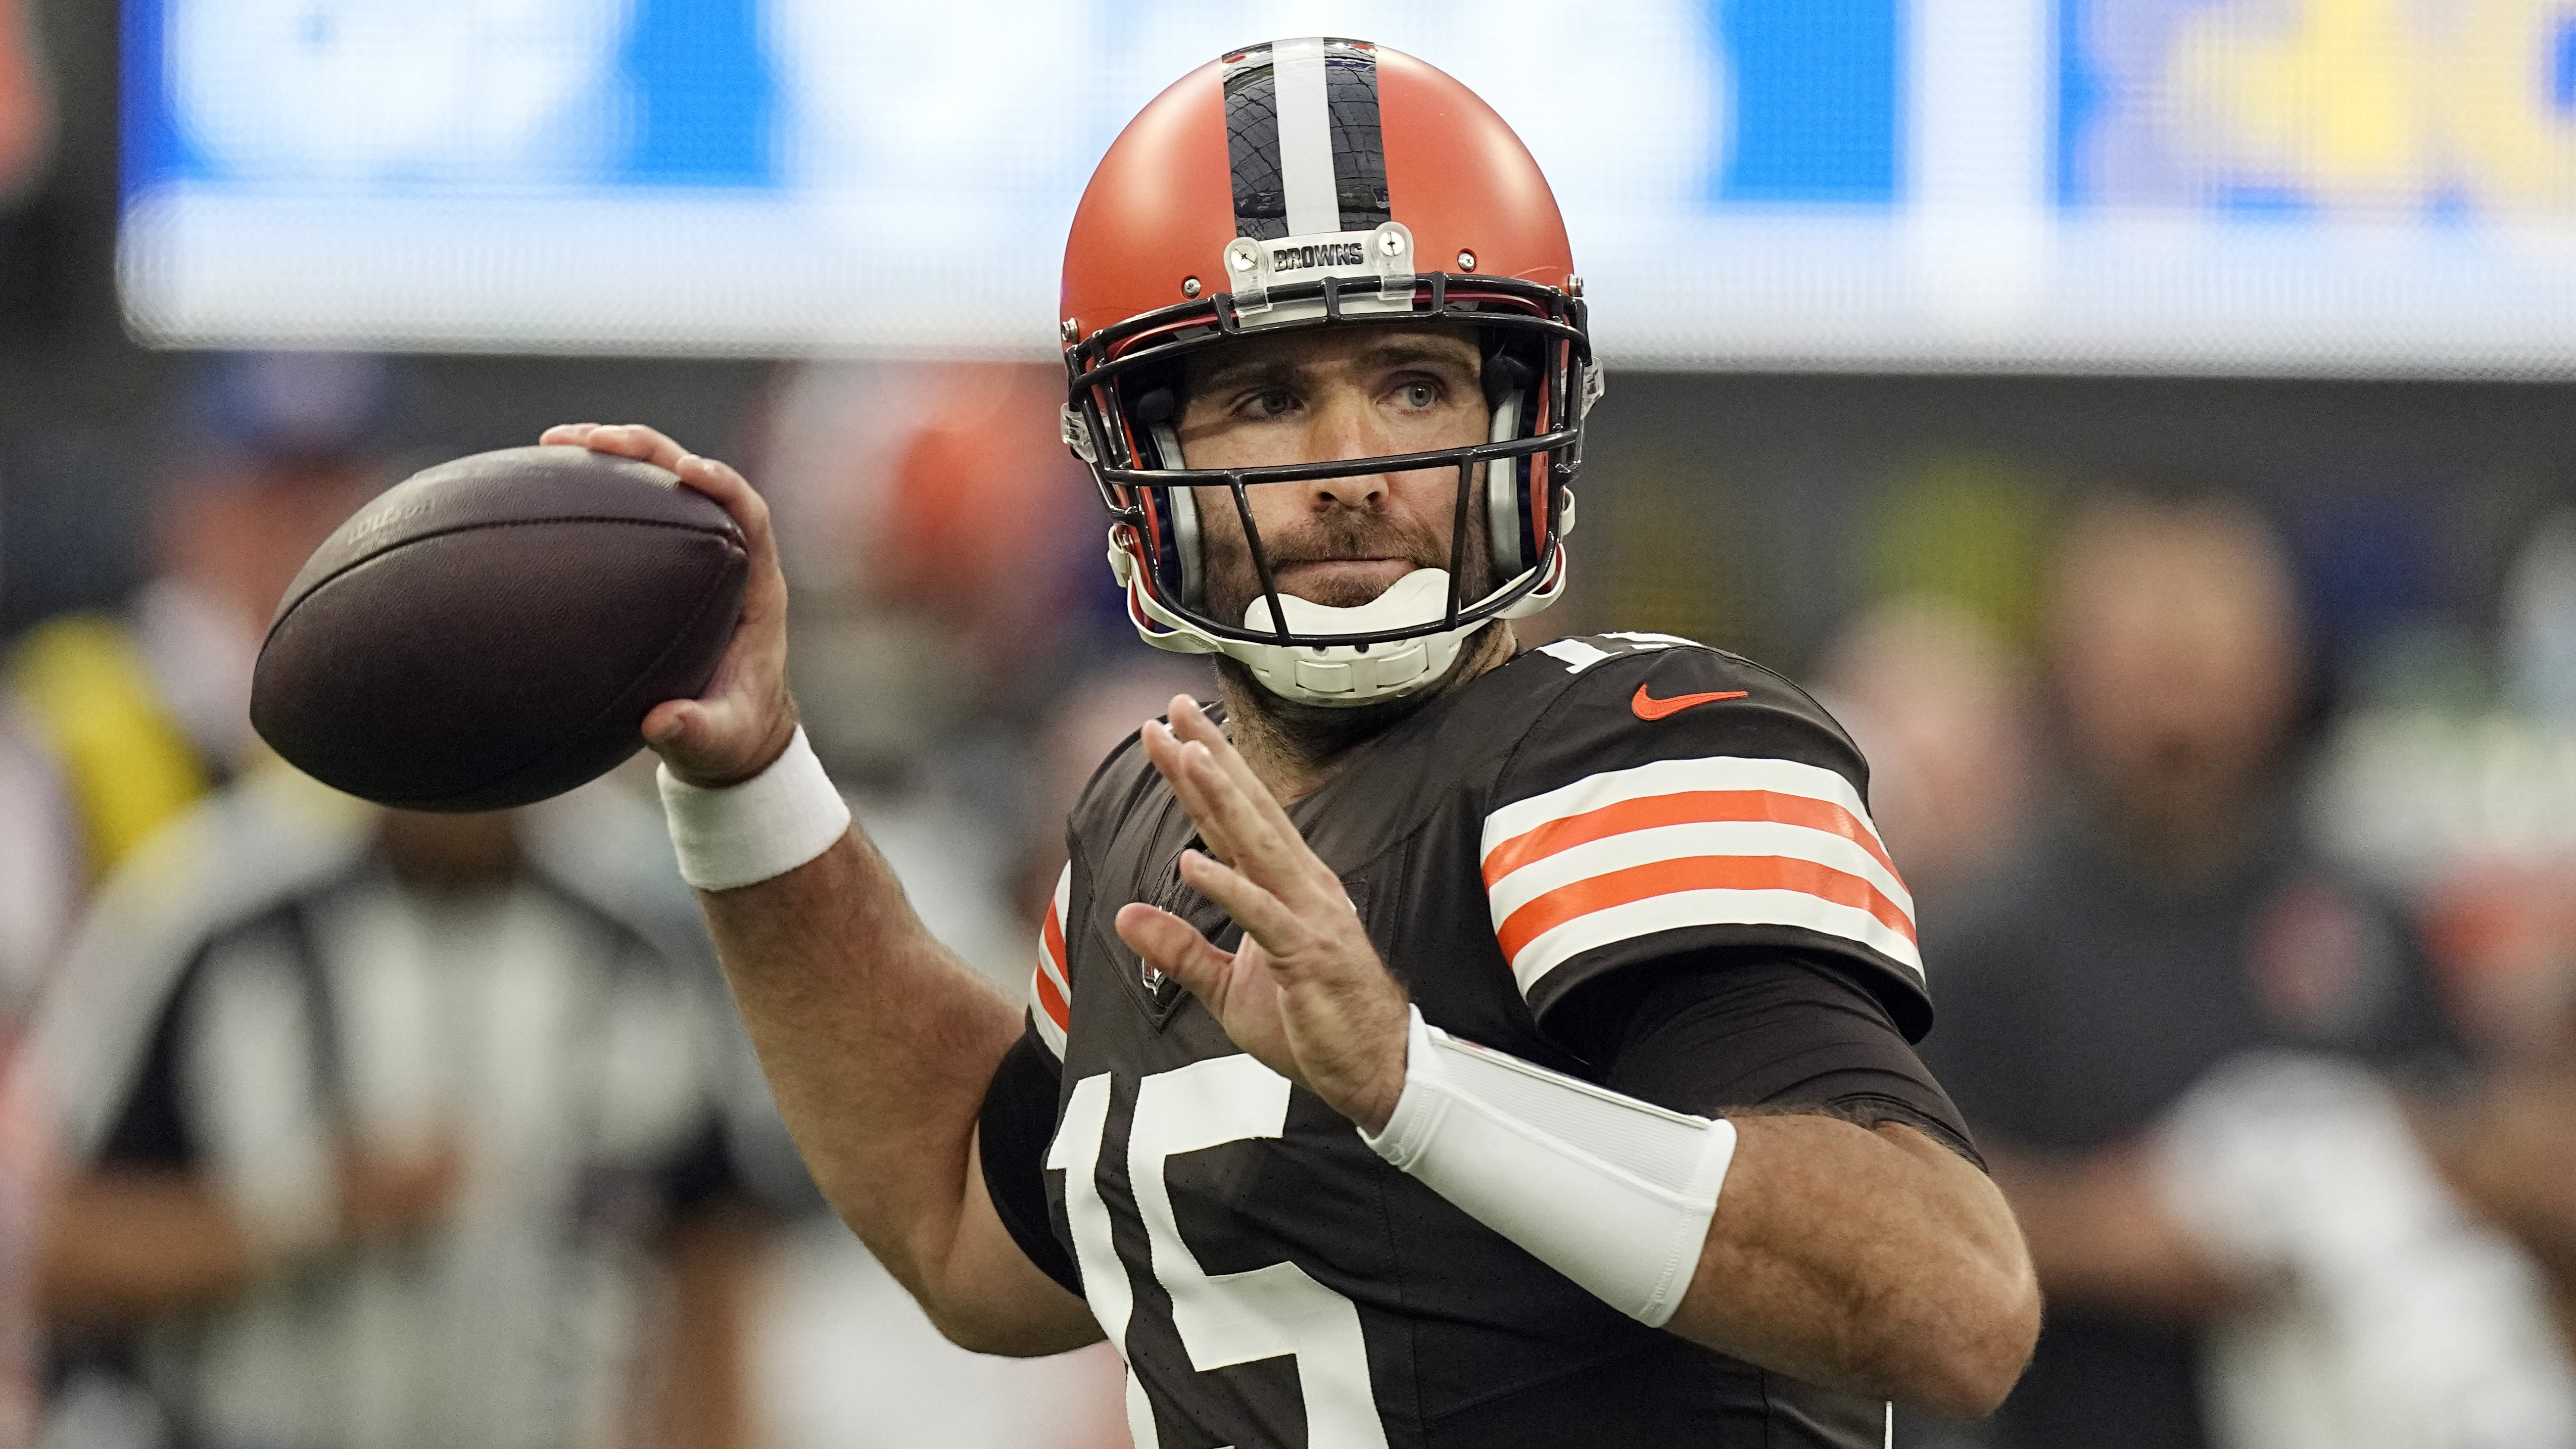 Joe Flacco delivers a pass for the Browns in a game against the Rams